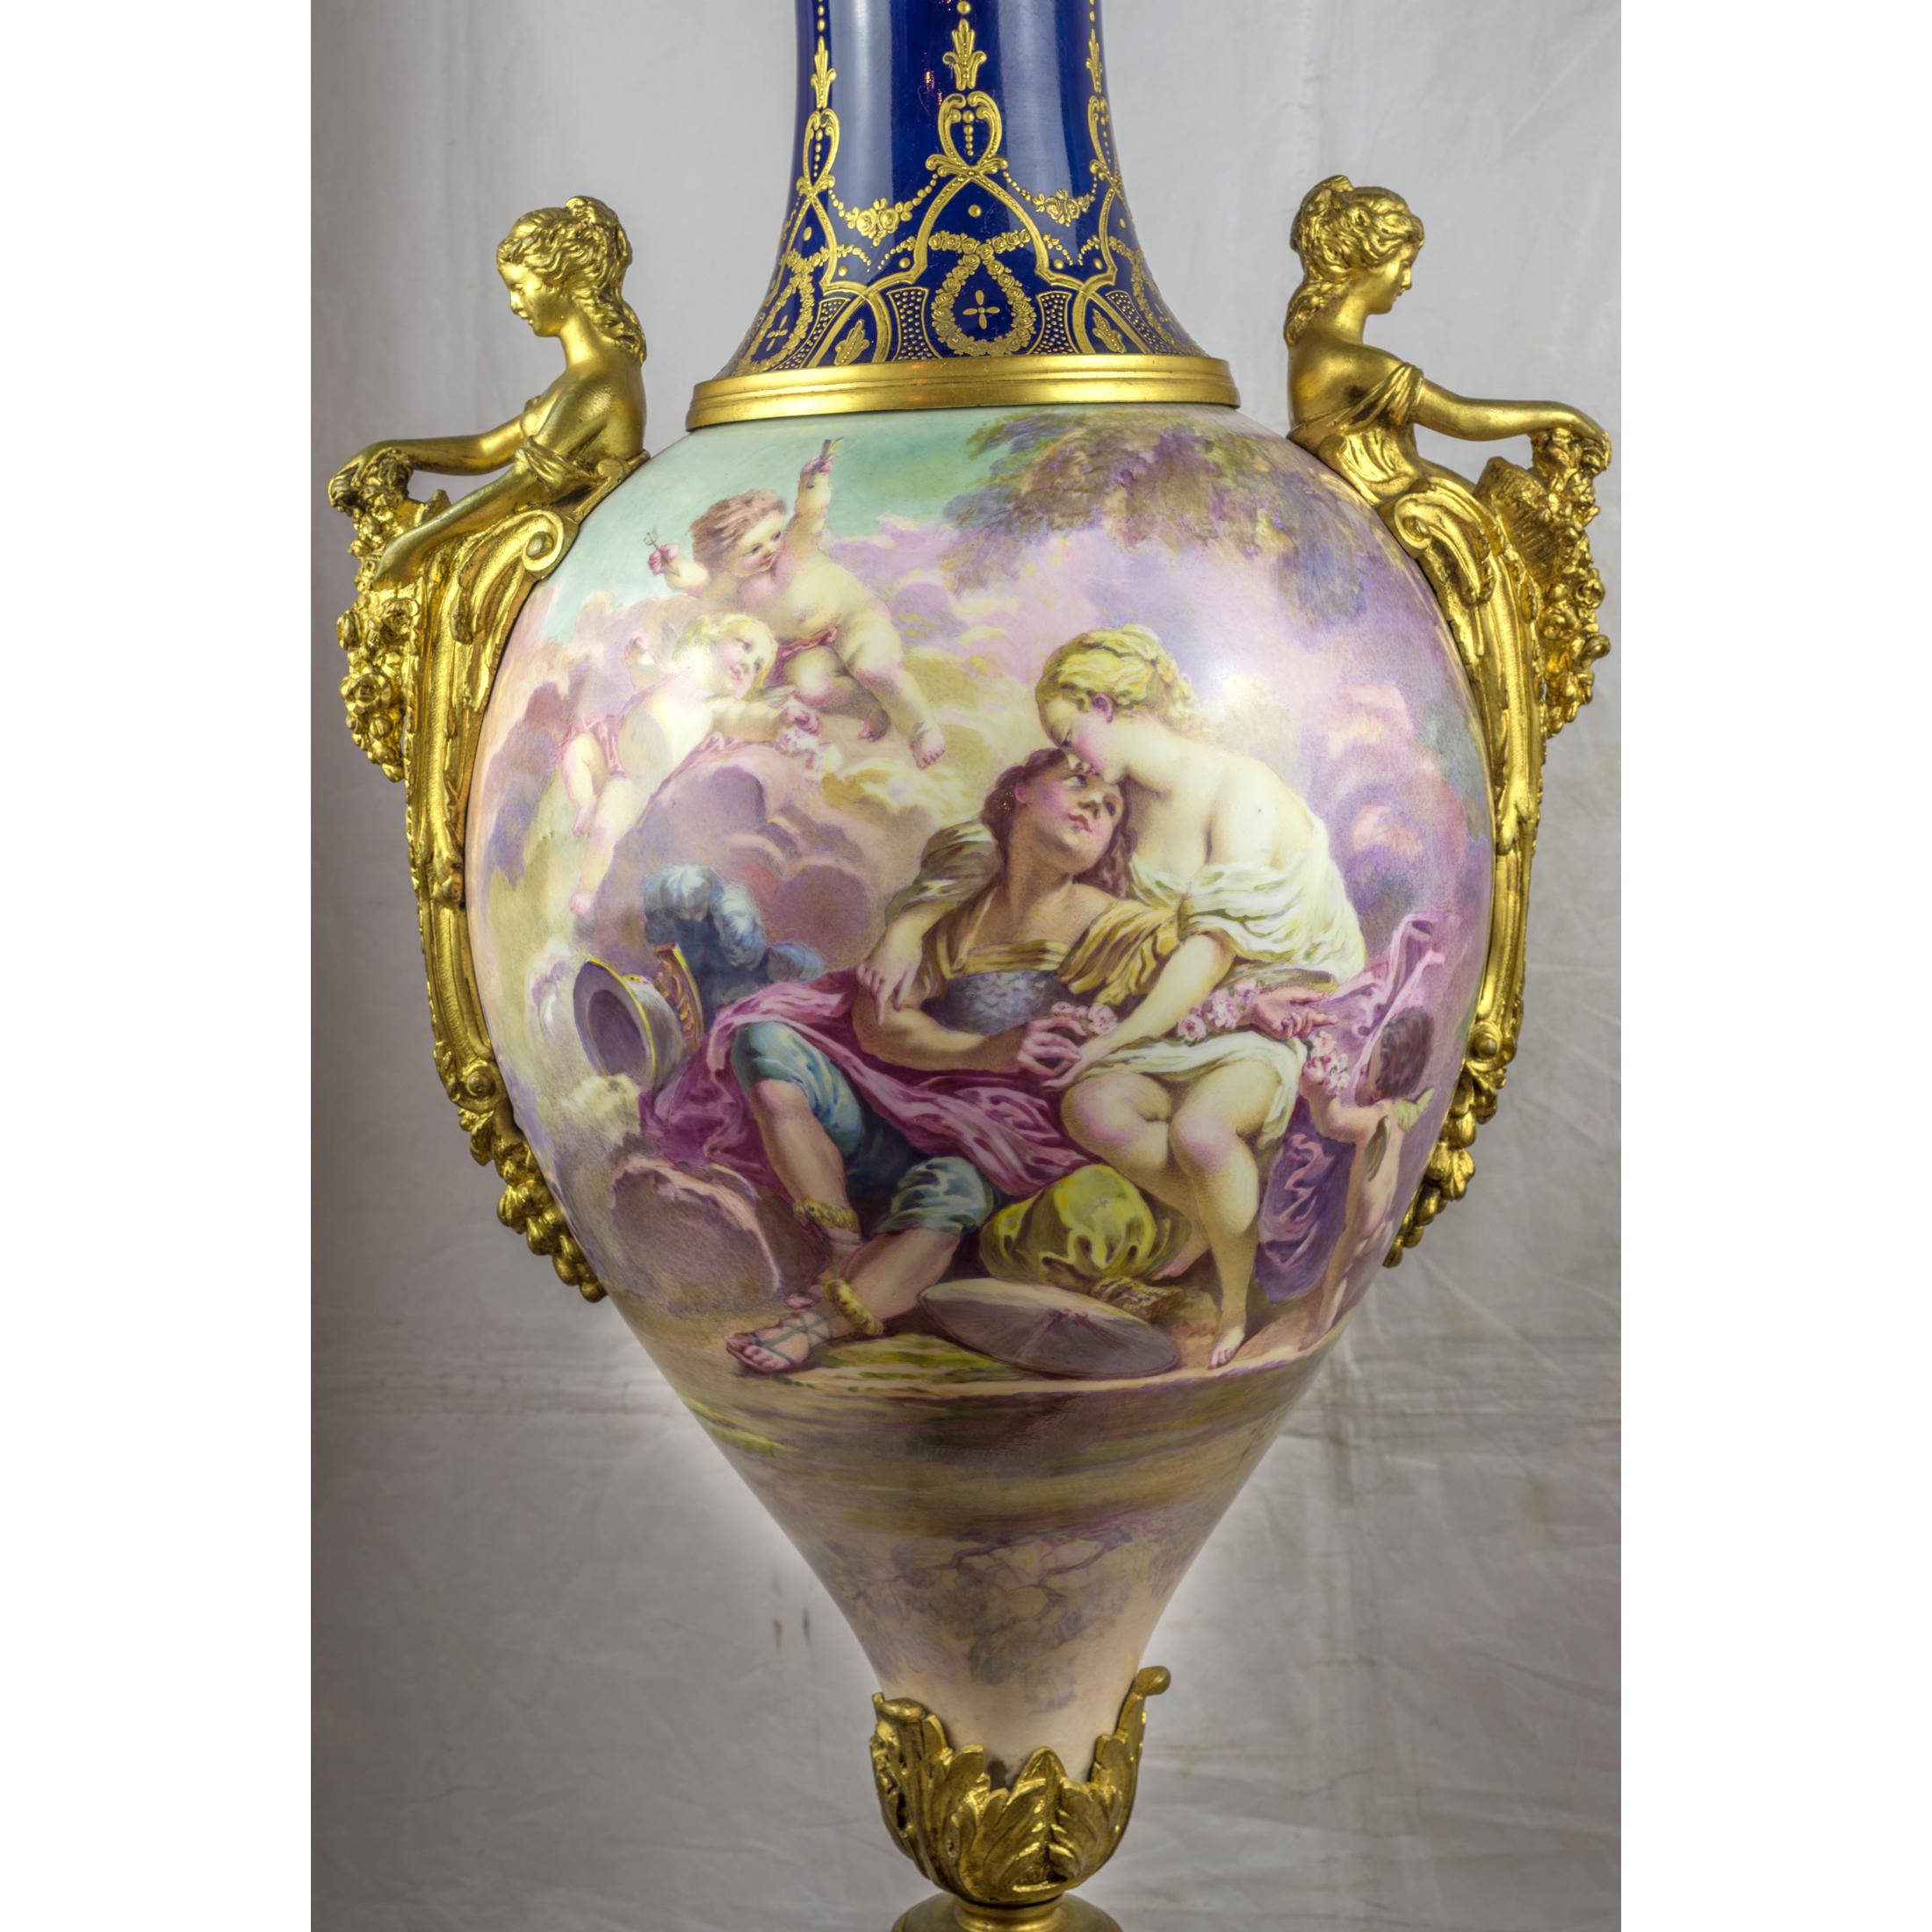 A fine quality Sèvres style porcelain and gilt bronze-mounted vase and Cover.
Hand painted continuous allegorical figural scene, signed Maxant

Origin: French
Date: circa 1860
Dimension: 45 in x 15 1/2 in.